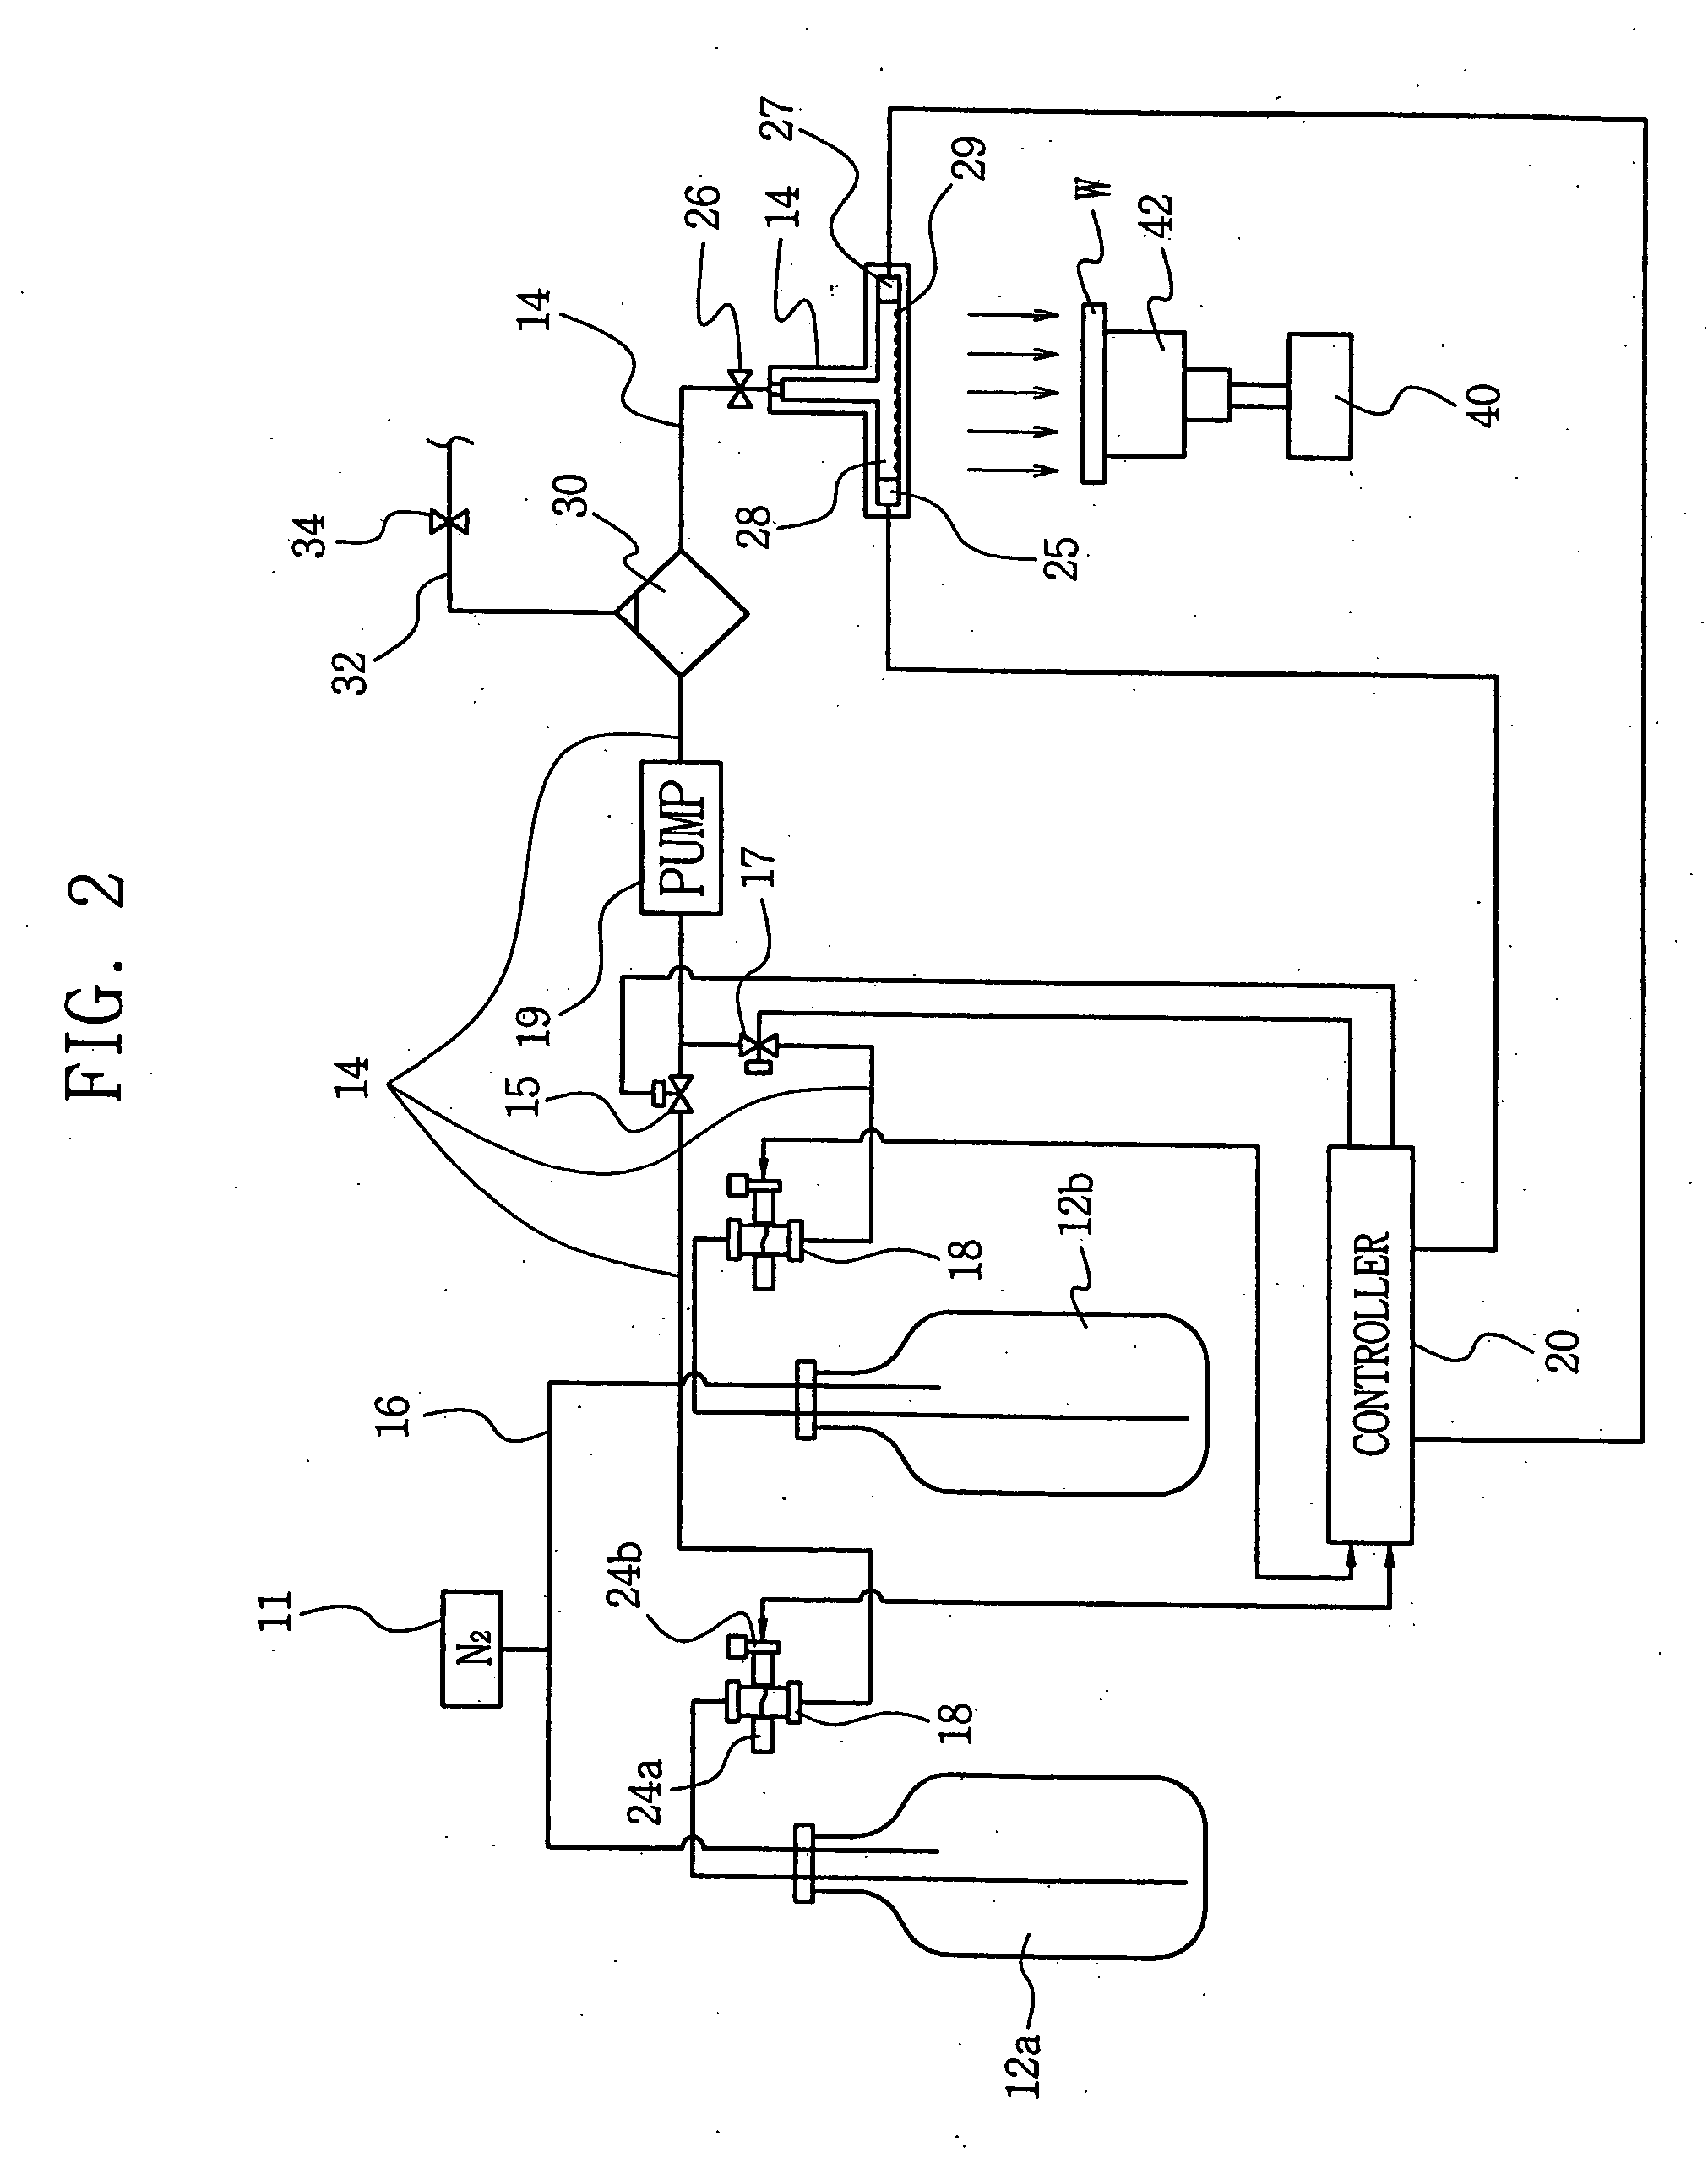 Device for controlling dispensing error in photo spinner equipment